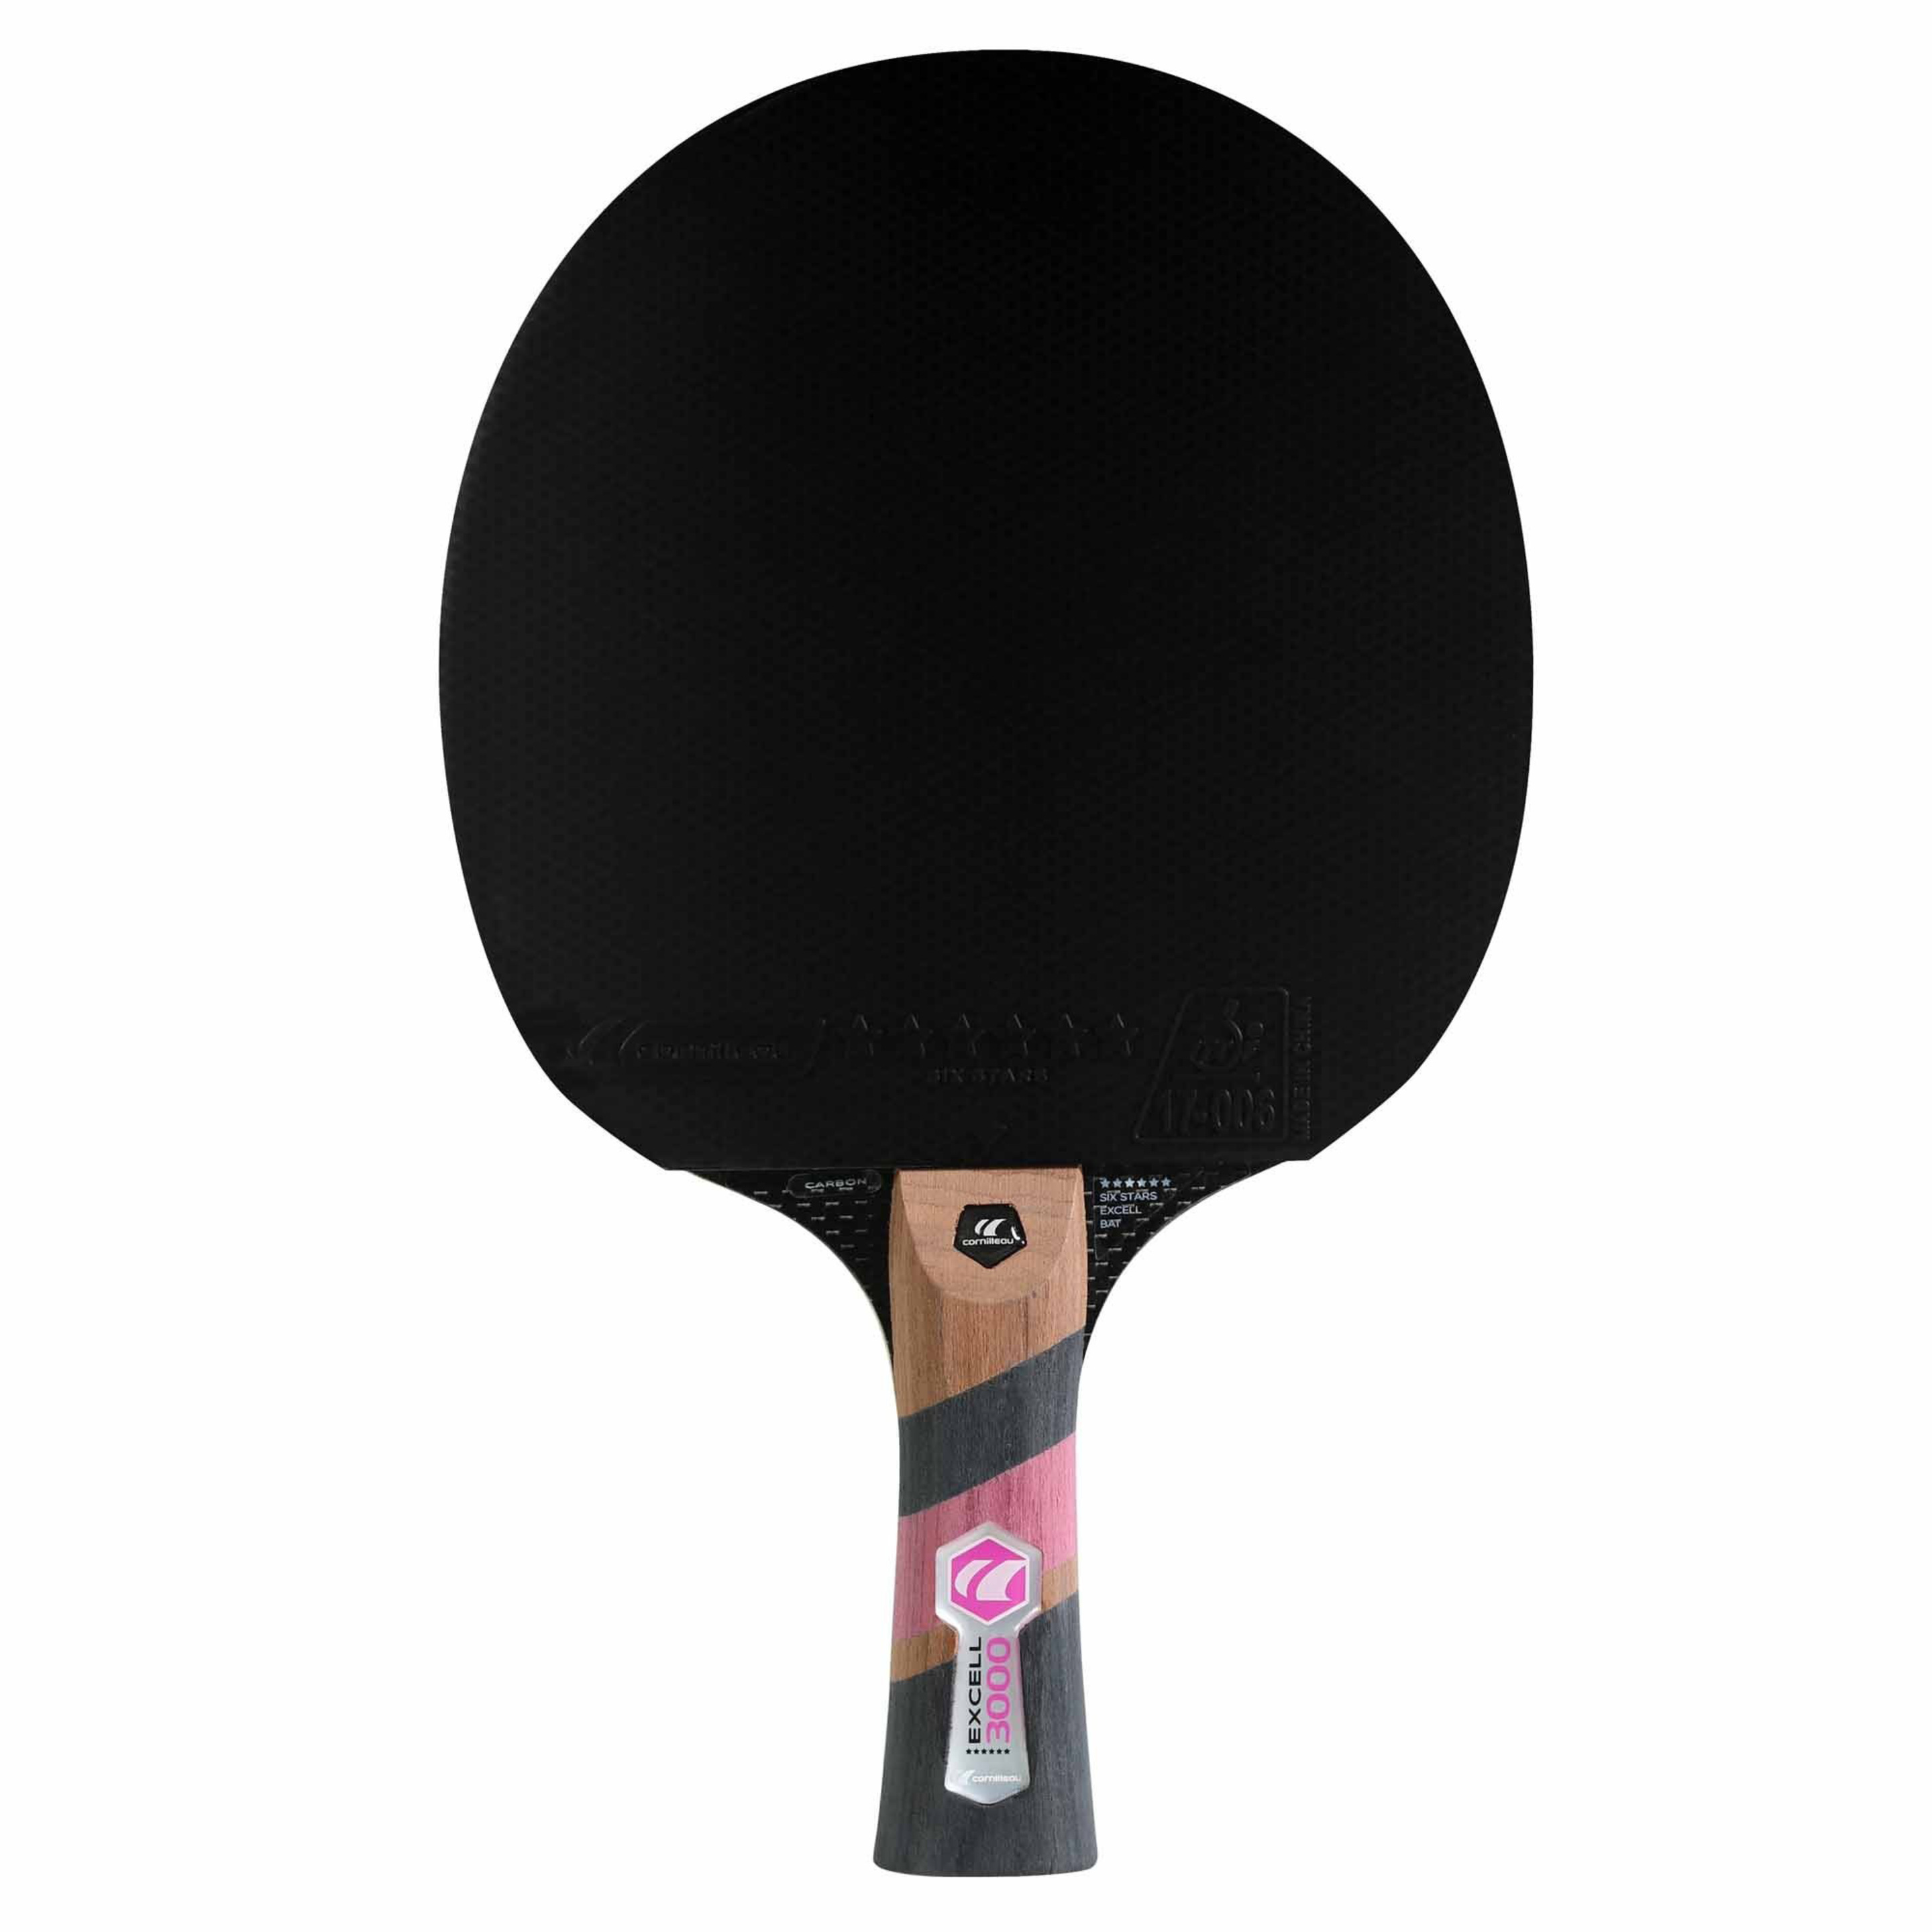 Pala Ping Pong Cornilleau Sport 3000 Excell Carbon 413000 - Negro - Pala Ping Pong Cornilleau Sport 300  MKP